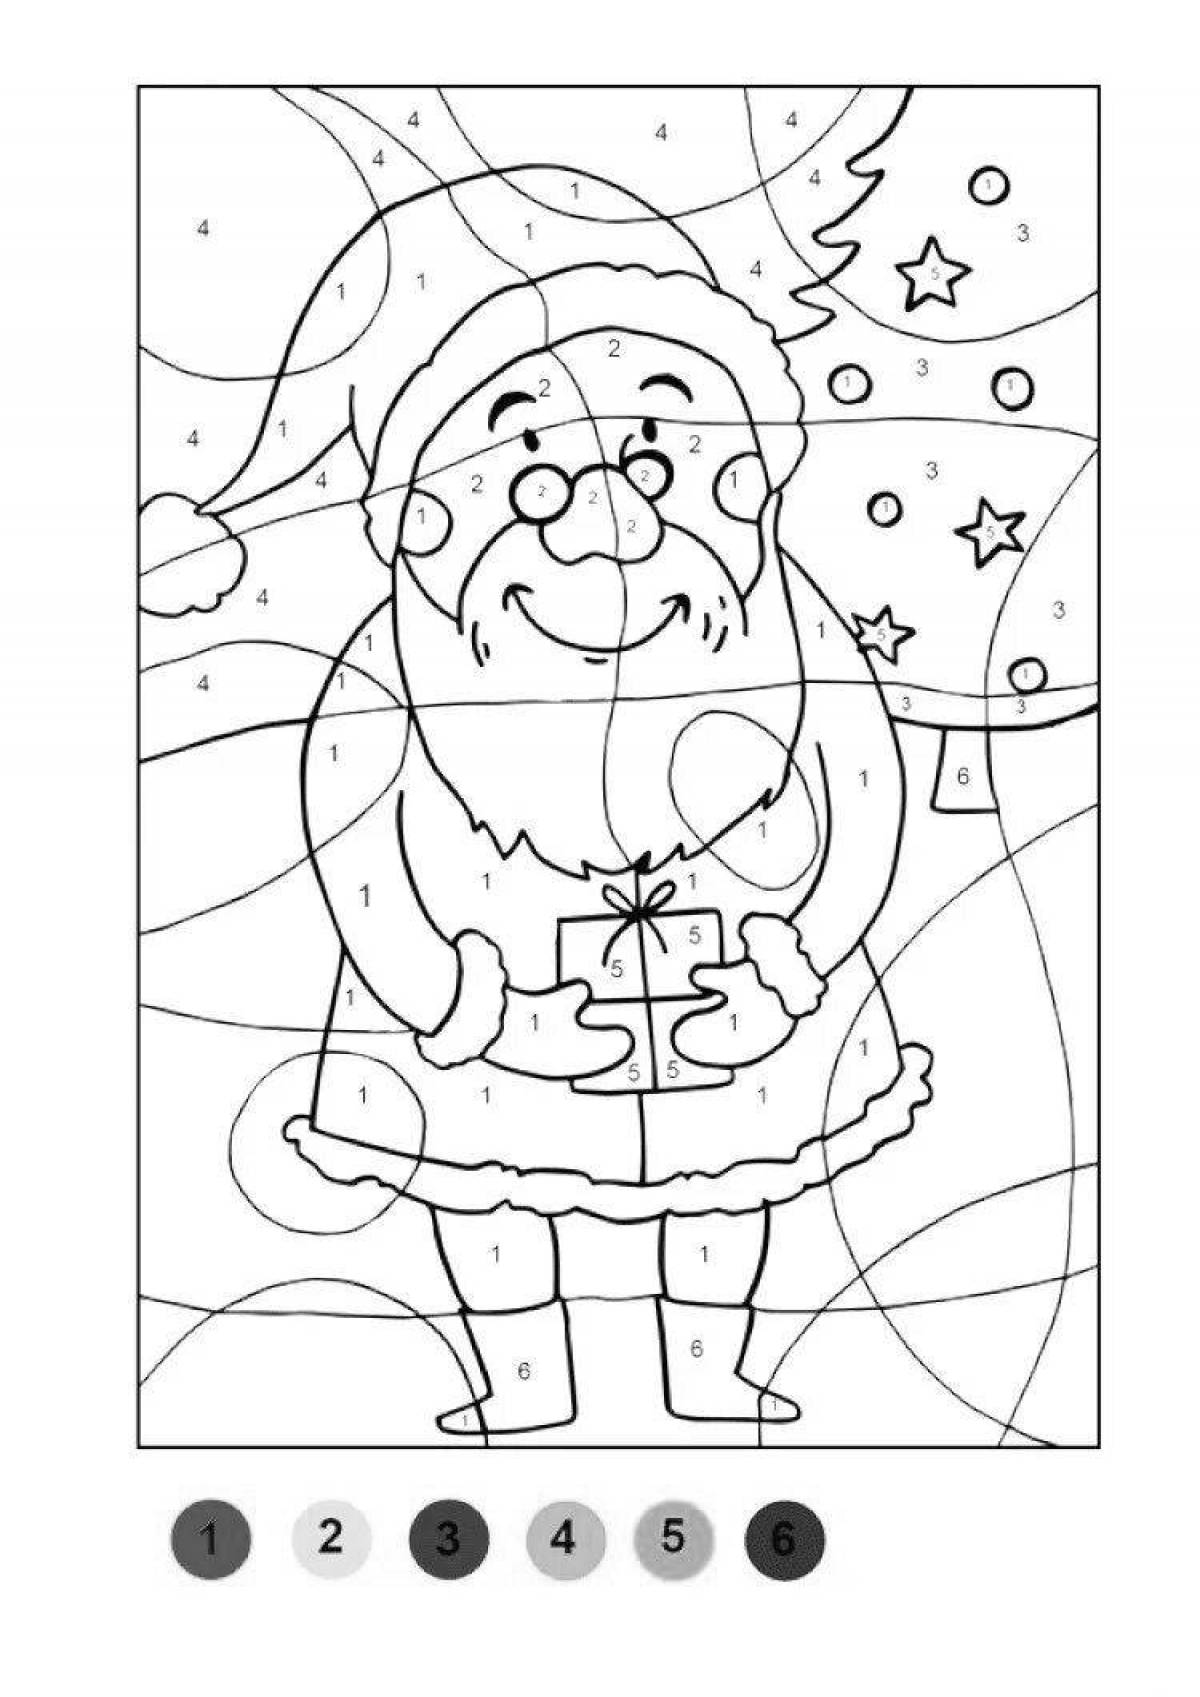 Exciting santa claus coloring by numbers